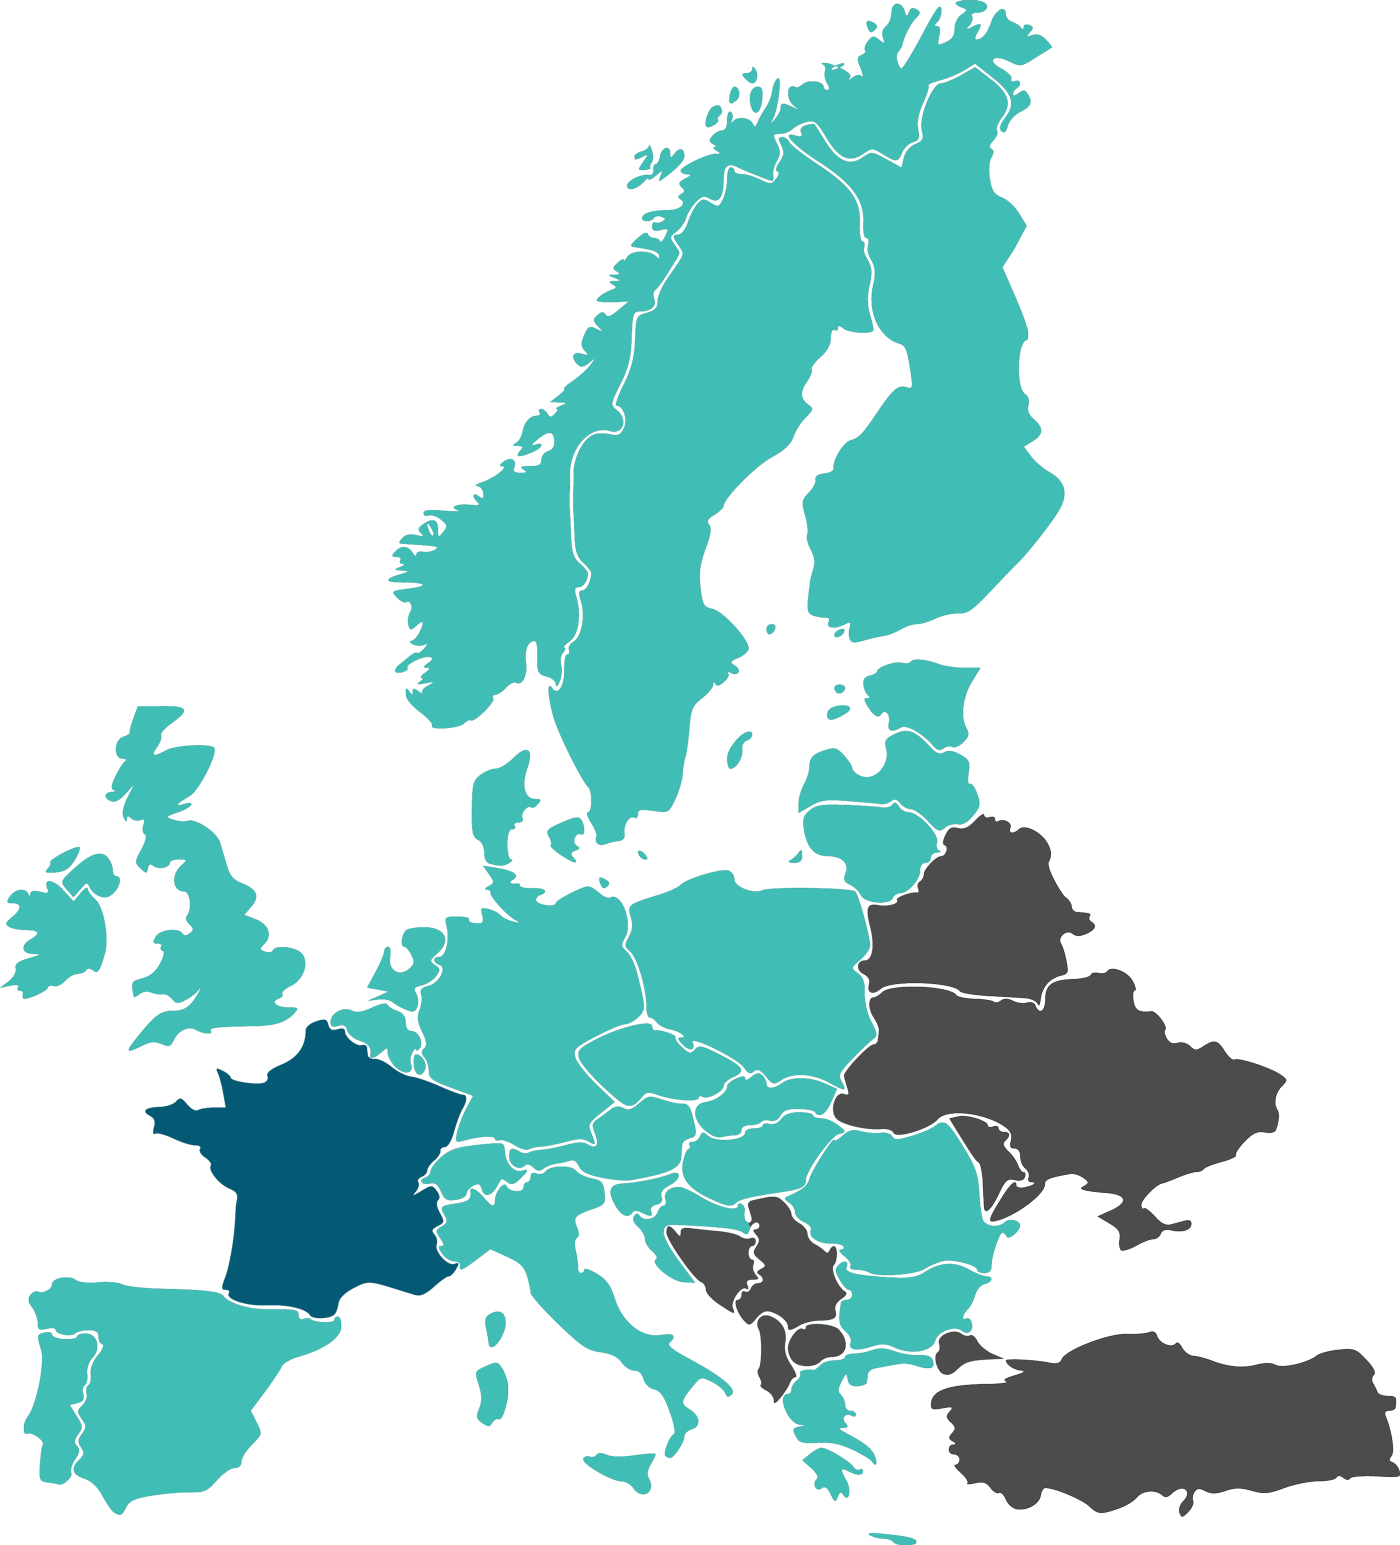 imgfile/europe-map.png